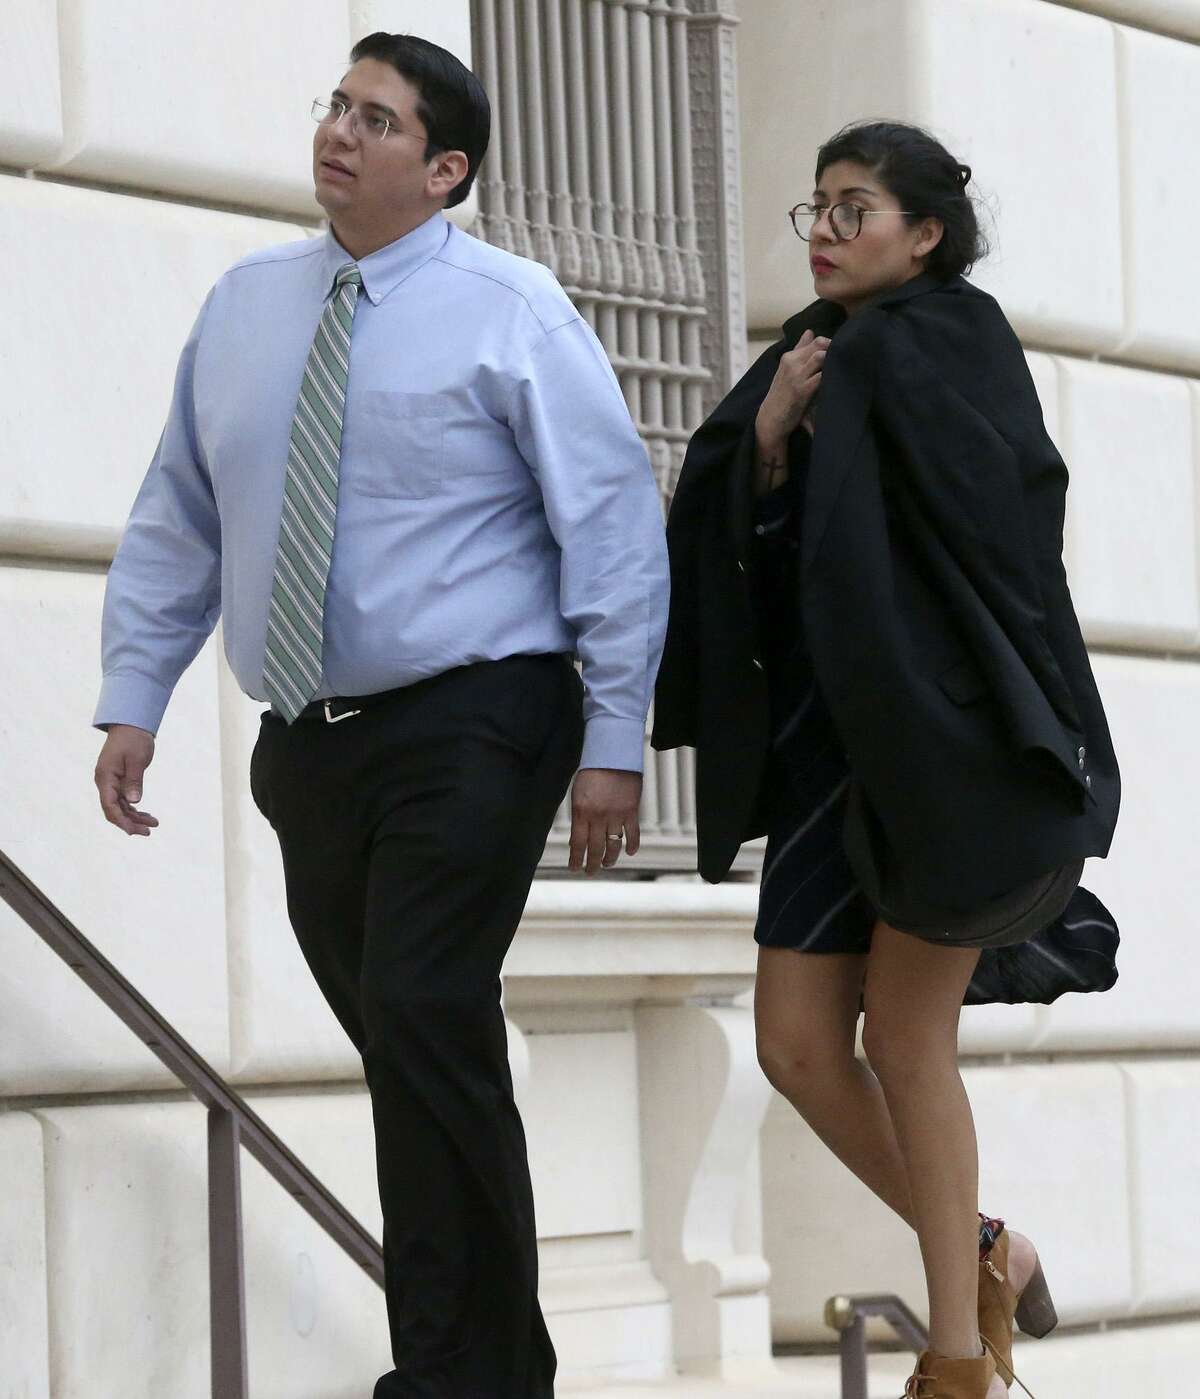 Witness Denise Cantu (right) enters the Hipolito Garcia Federal Courthouse in San Antonio Wednesday November 8, 2017. Cantu is a star witness in the criminal fraud trial of state Senator Carlos Uresti. In the bankruptcy case, the trustee is seeking to recover money from an early investor in FourWinds Logistics for the benefit of the bankruptcy estate. Cantu invested hundreds of thousands of dollars in FourWinds Logistics.